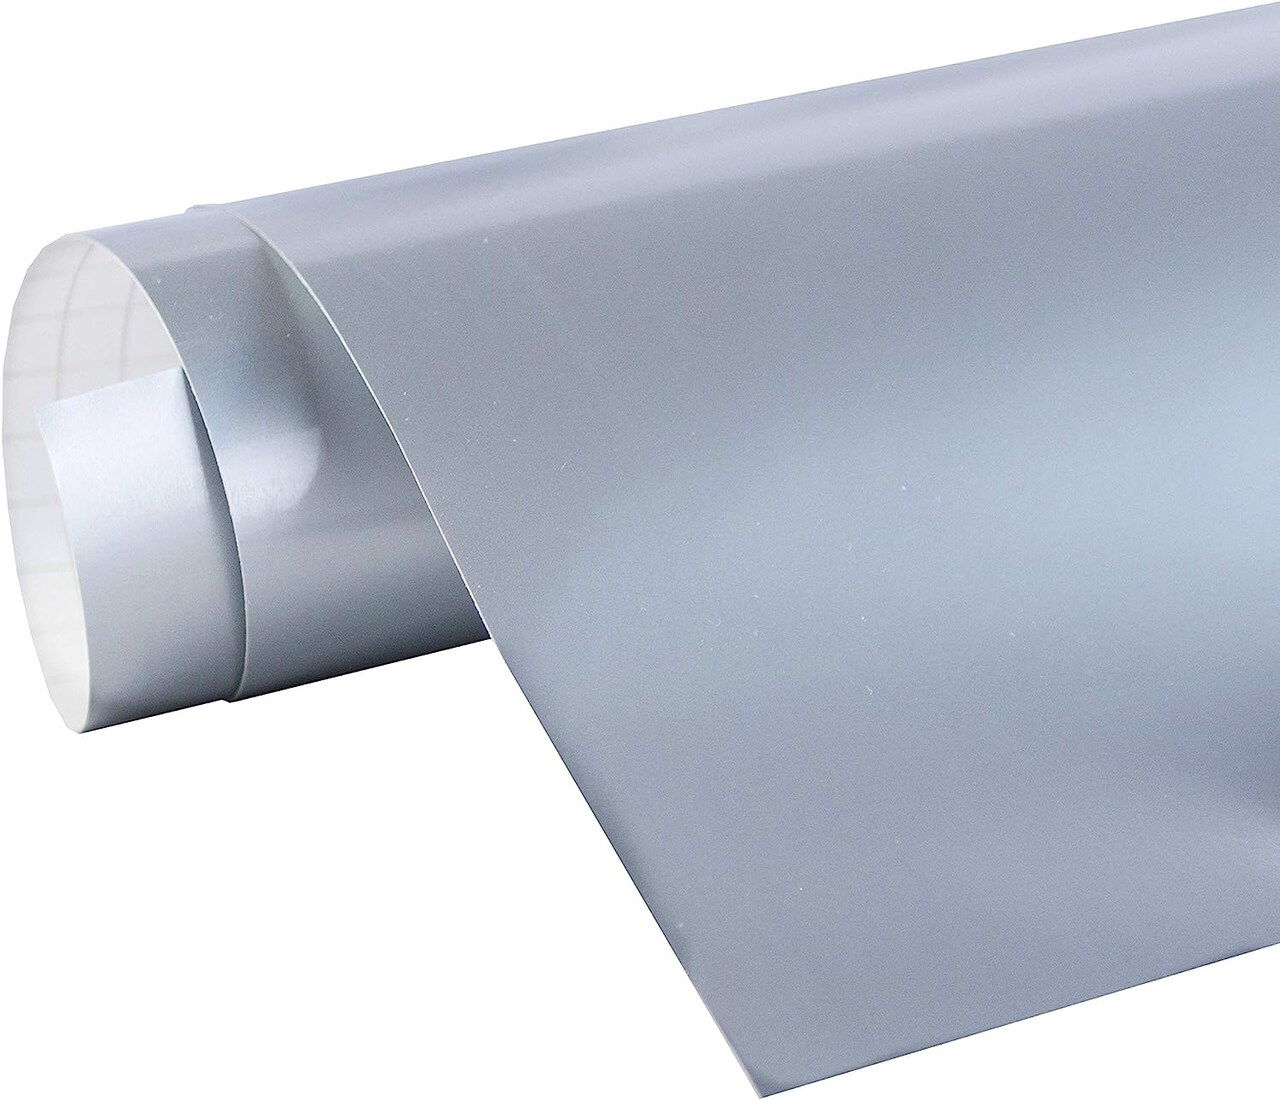 24 x 10 ft Roll of SILVER Adhesive-Backed Vinyl for Craft Cutters, Punches  and Vinyl Sign Cutters